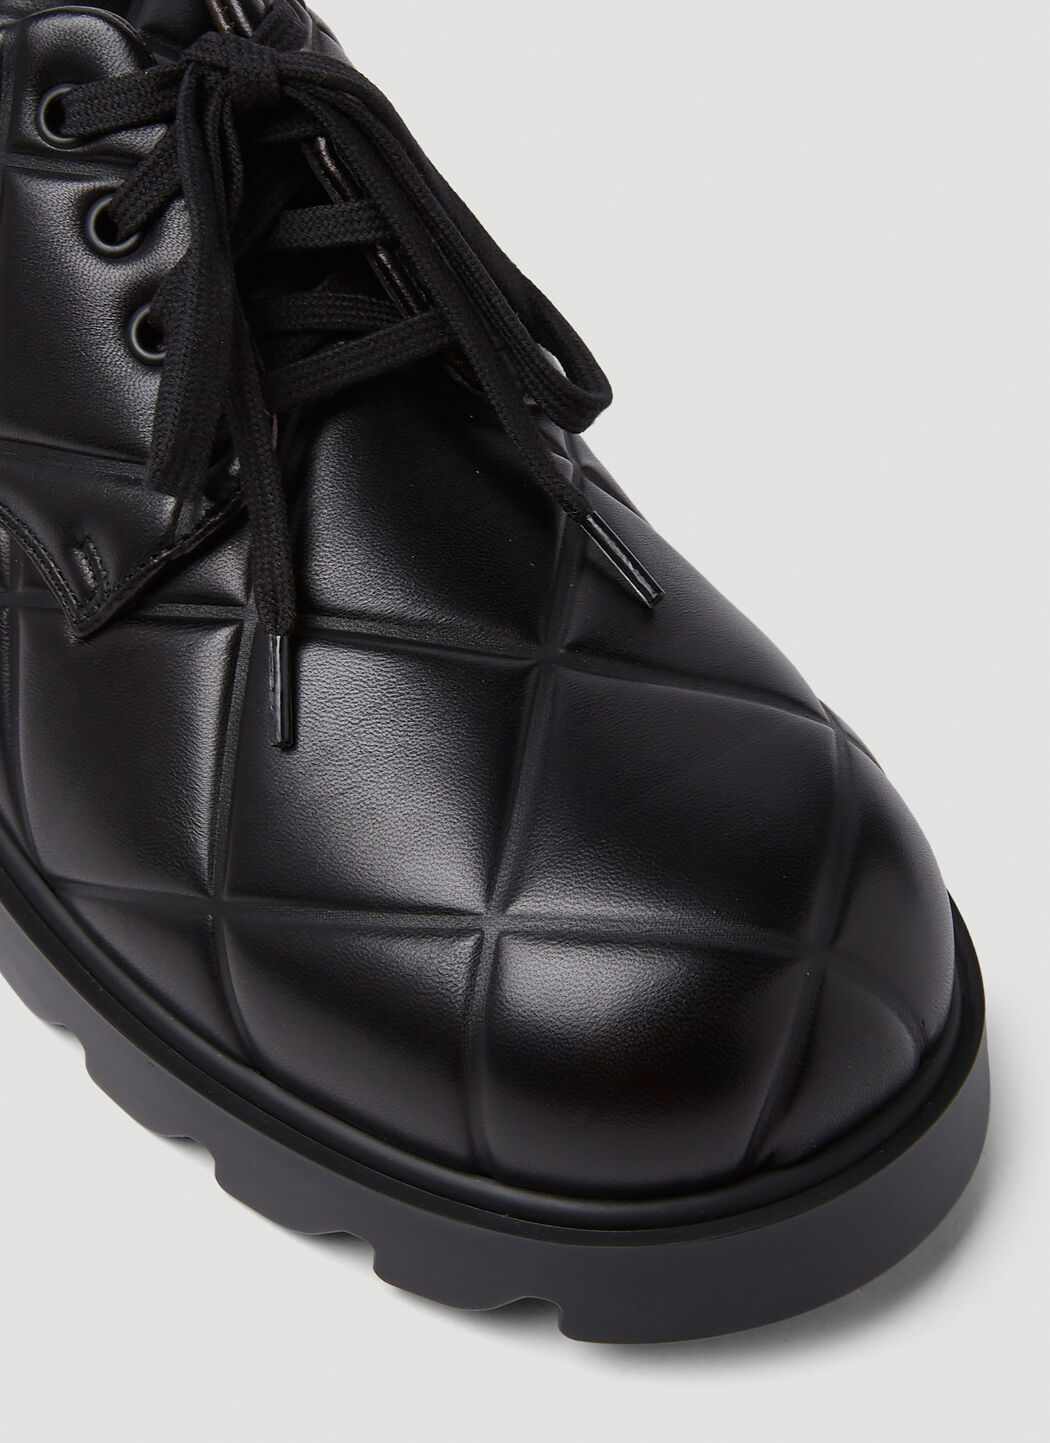 Bottega Veneta Quilted Lace Up Shoes in Black | LN-CC